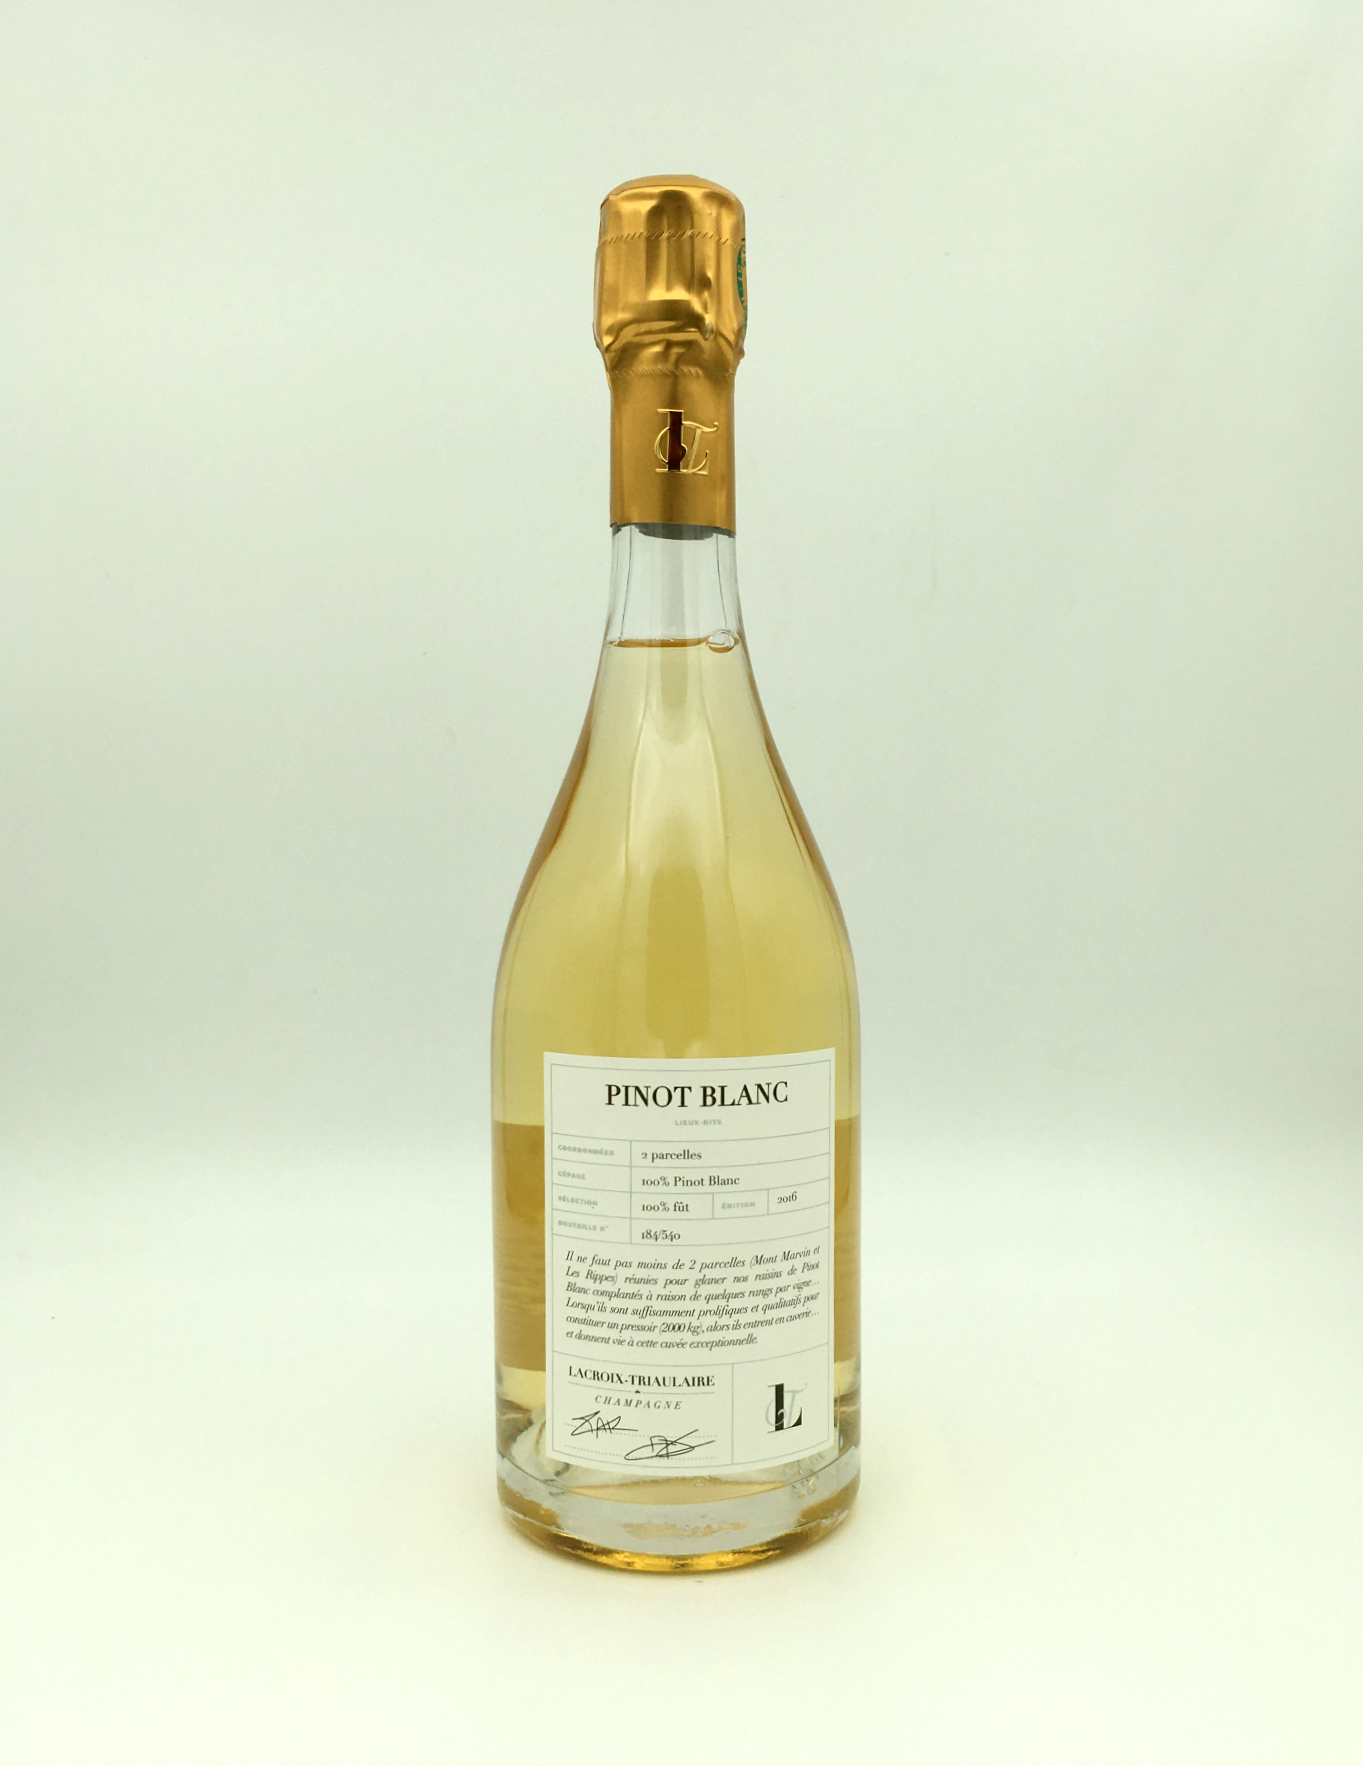 Lacroix Triaulaire – Pinot Blanc